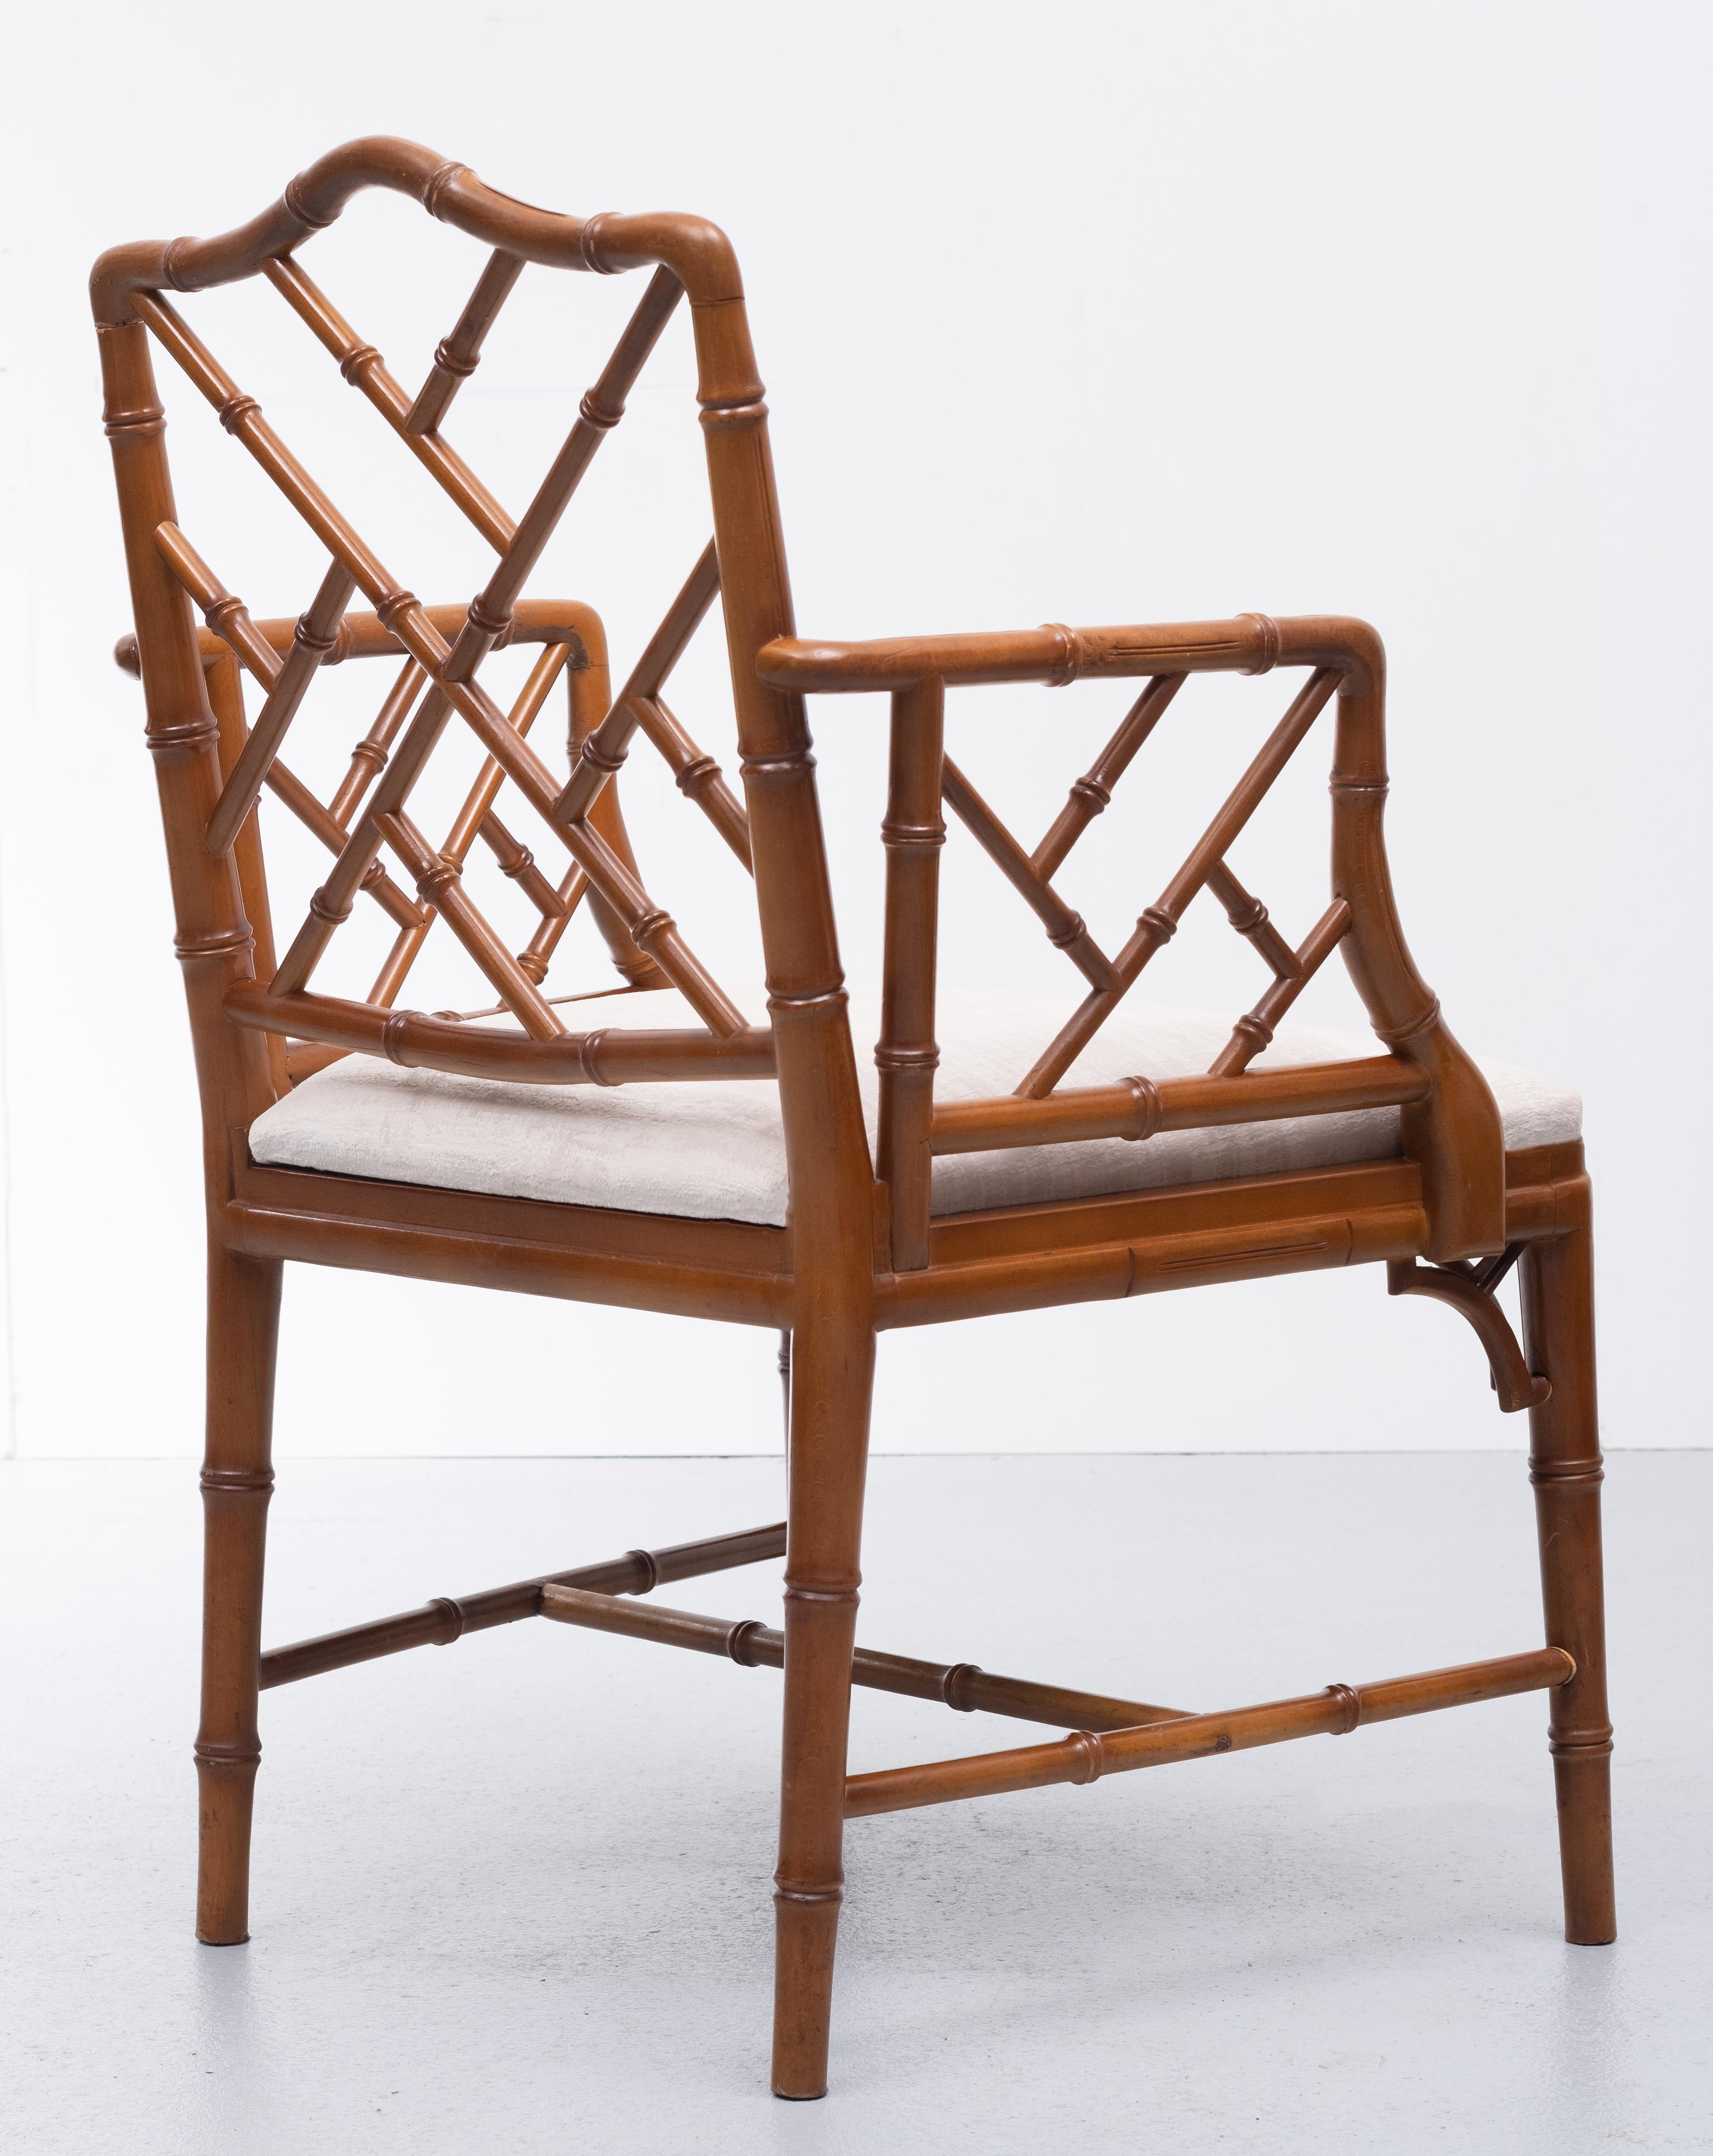 20th Century Chinese Chippendale Style Faux Bamboo Chairs 1